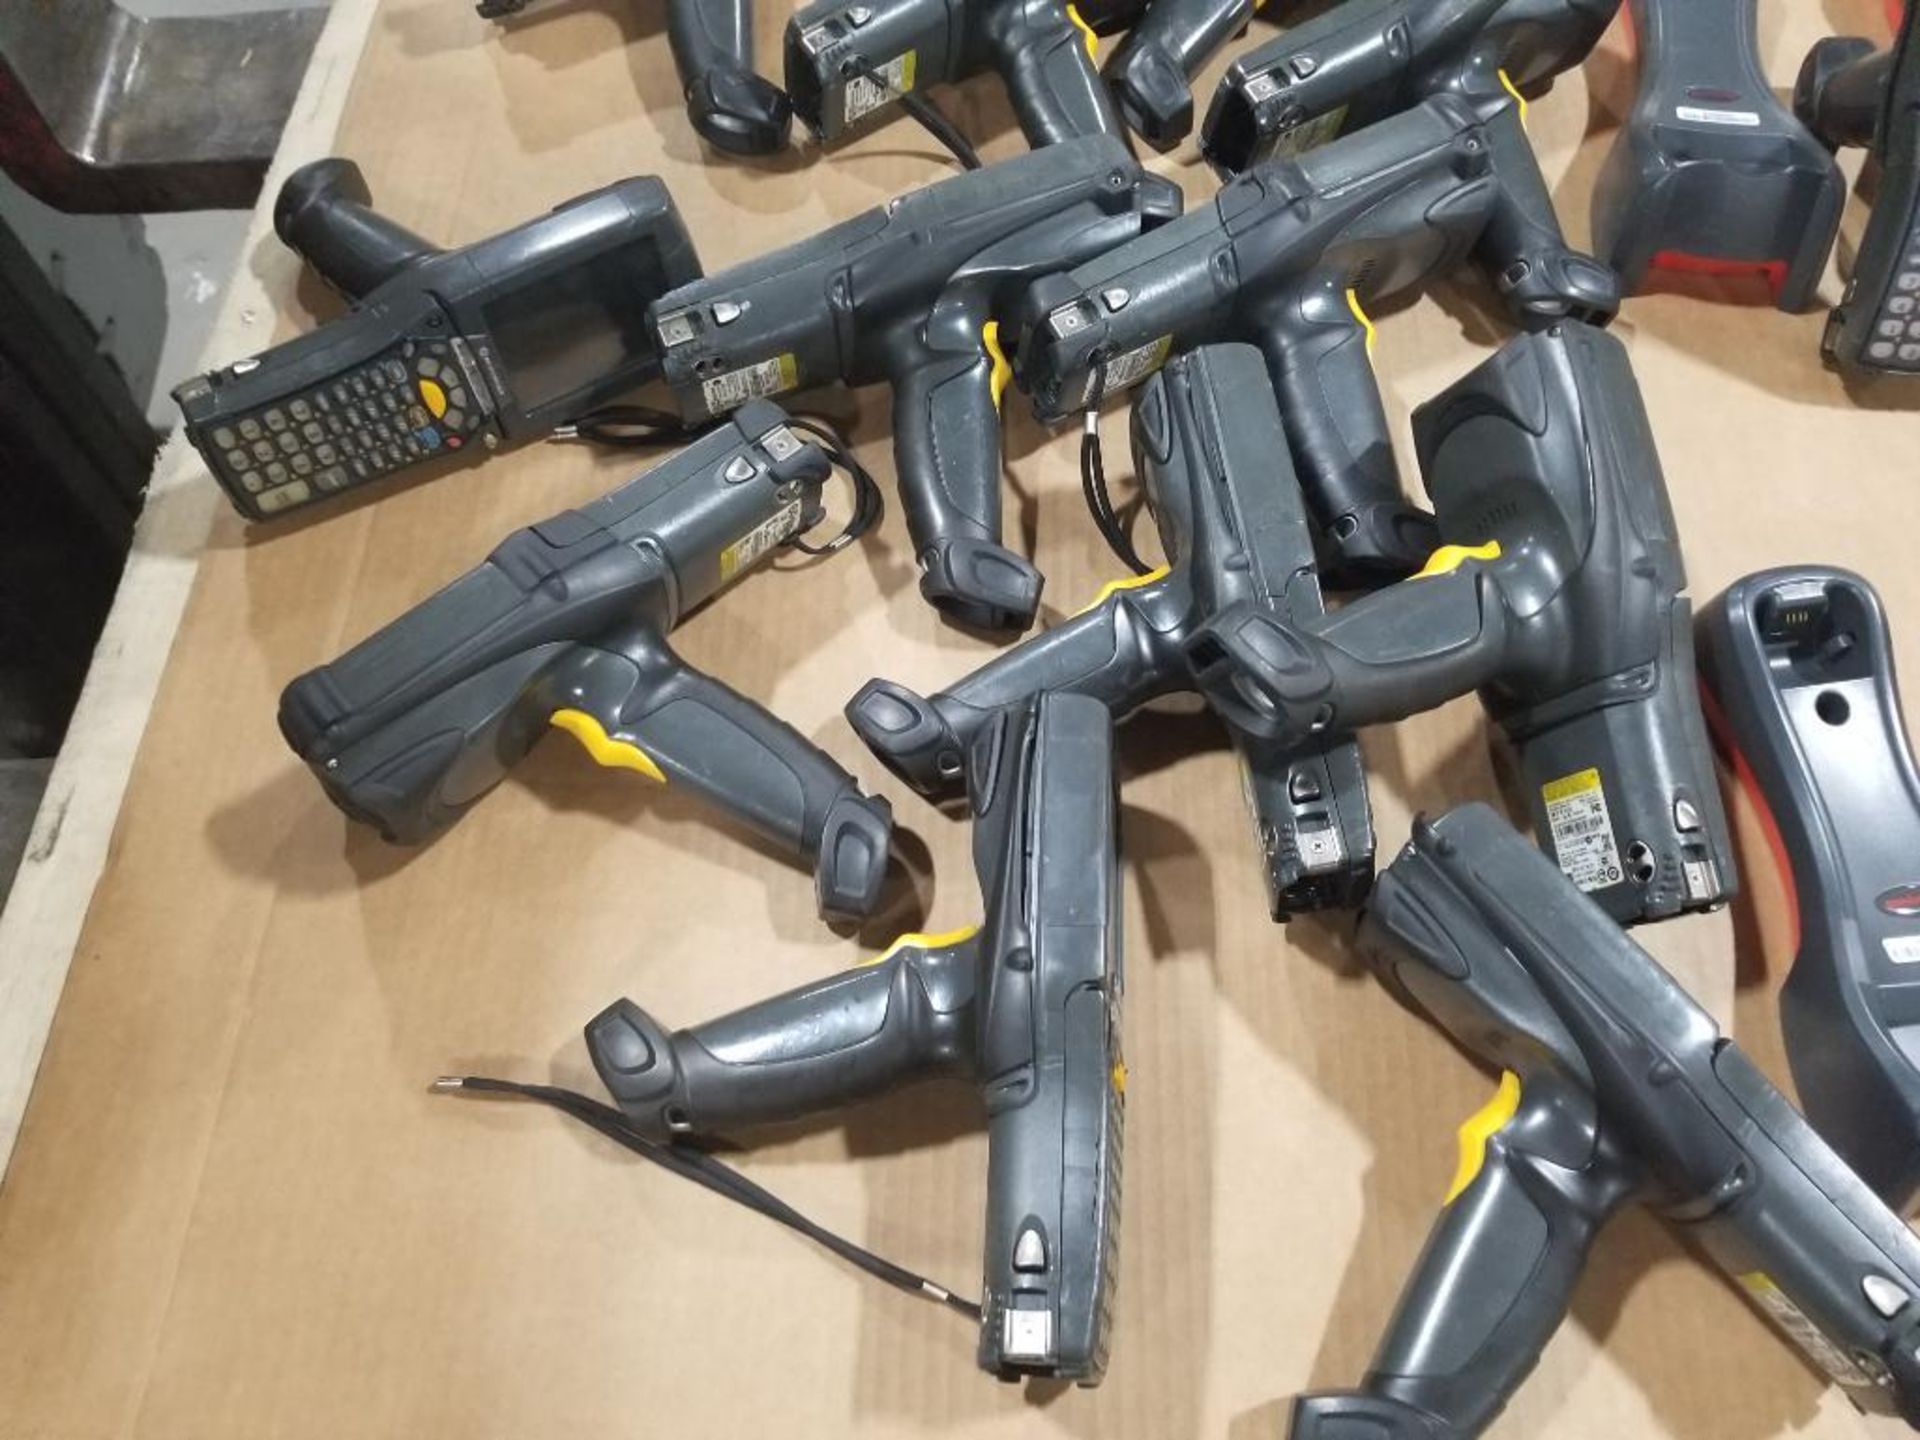 Large assortment of hand held bar code scanners. - Image 4 of 13